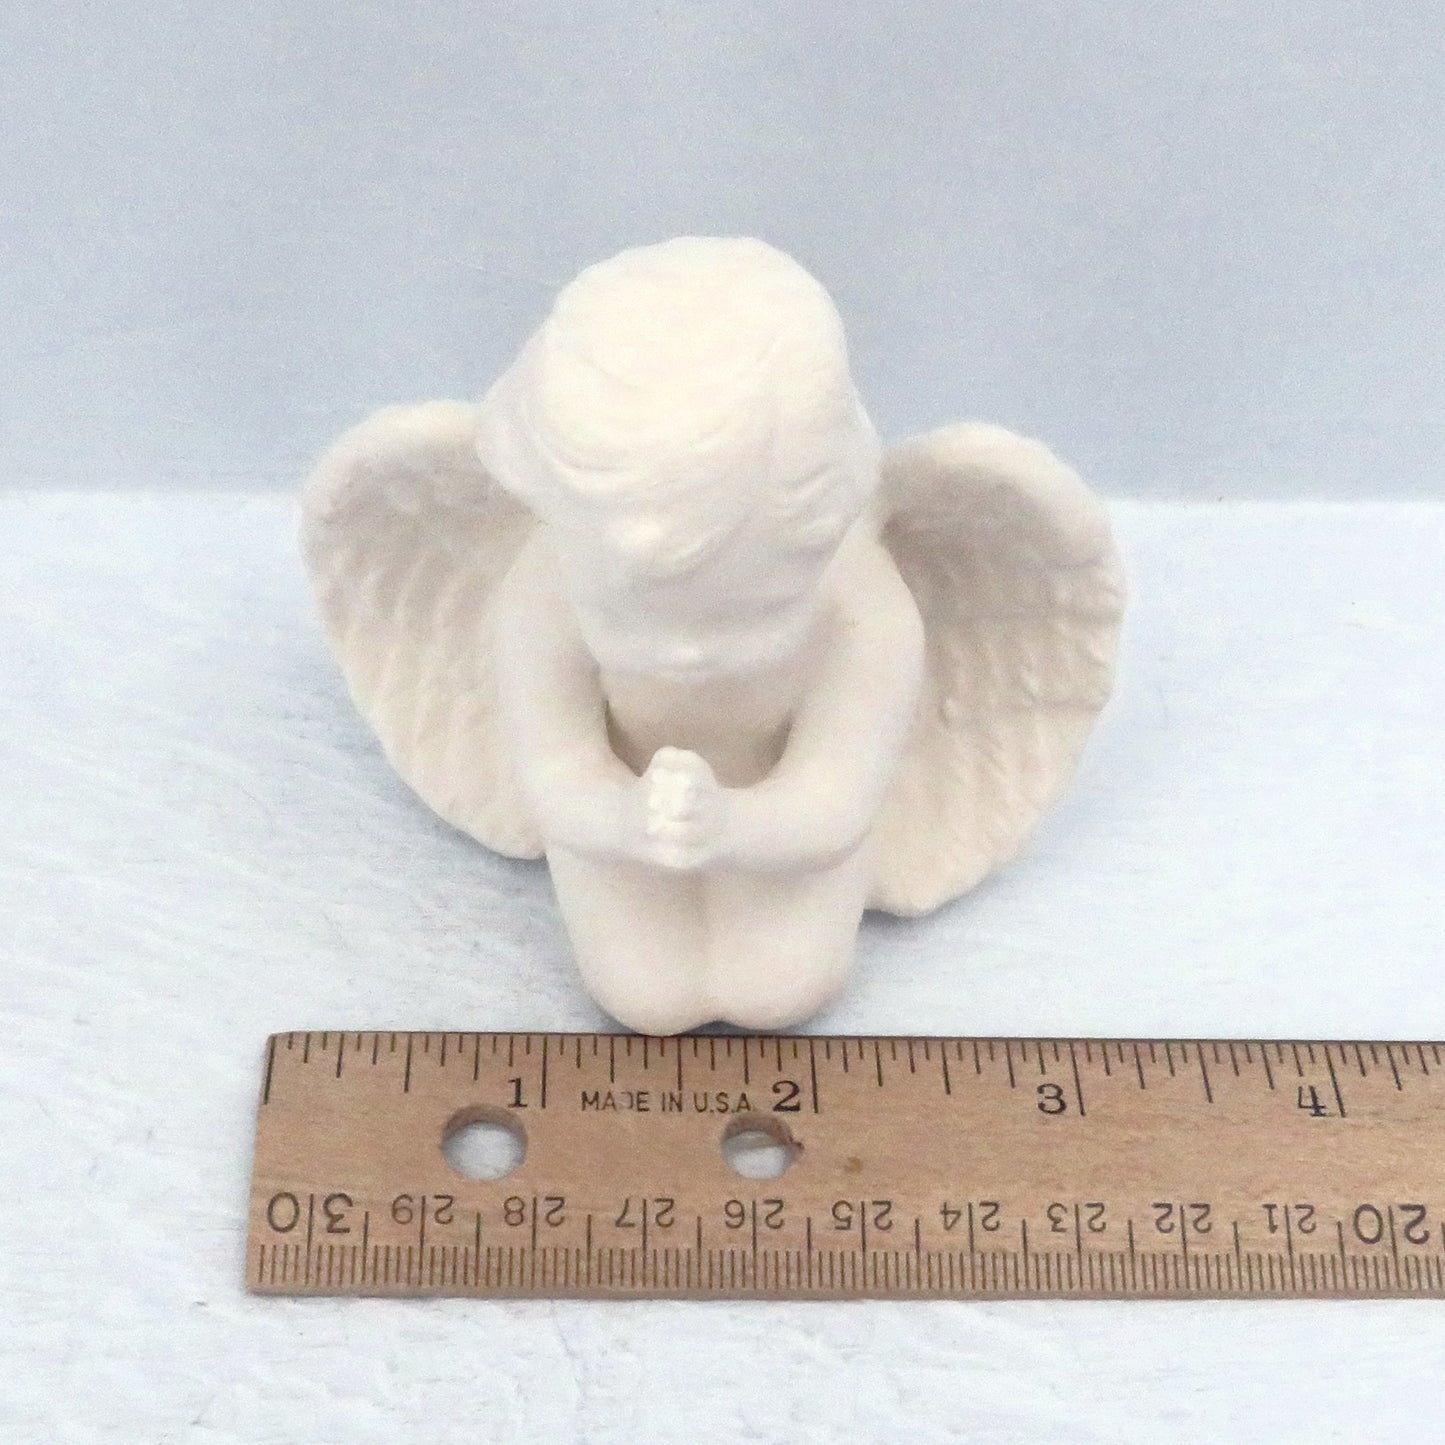 Top view of white bisque paintable ceramic praying angel on knees showing it to be approximately 3 1/4 inche across